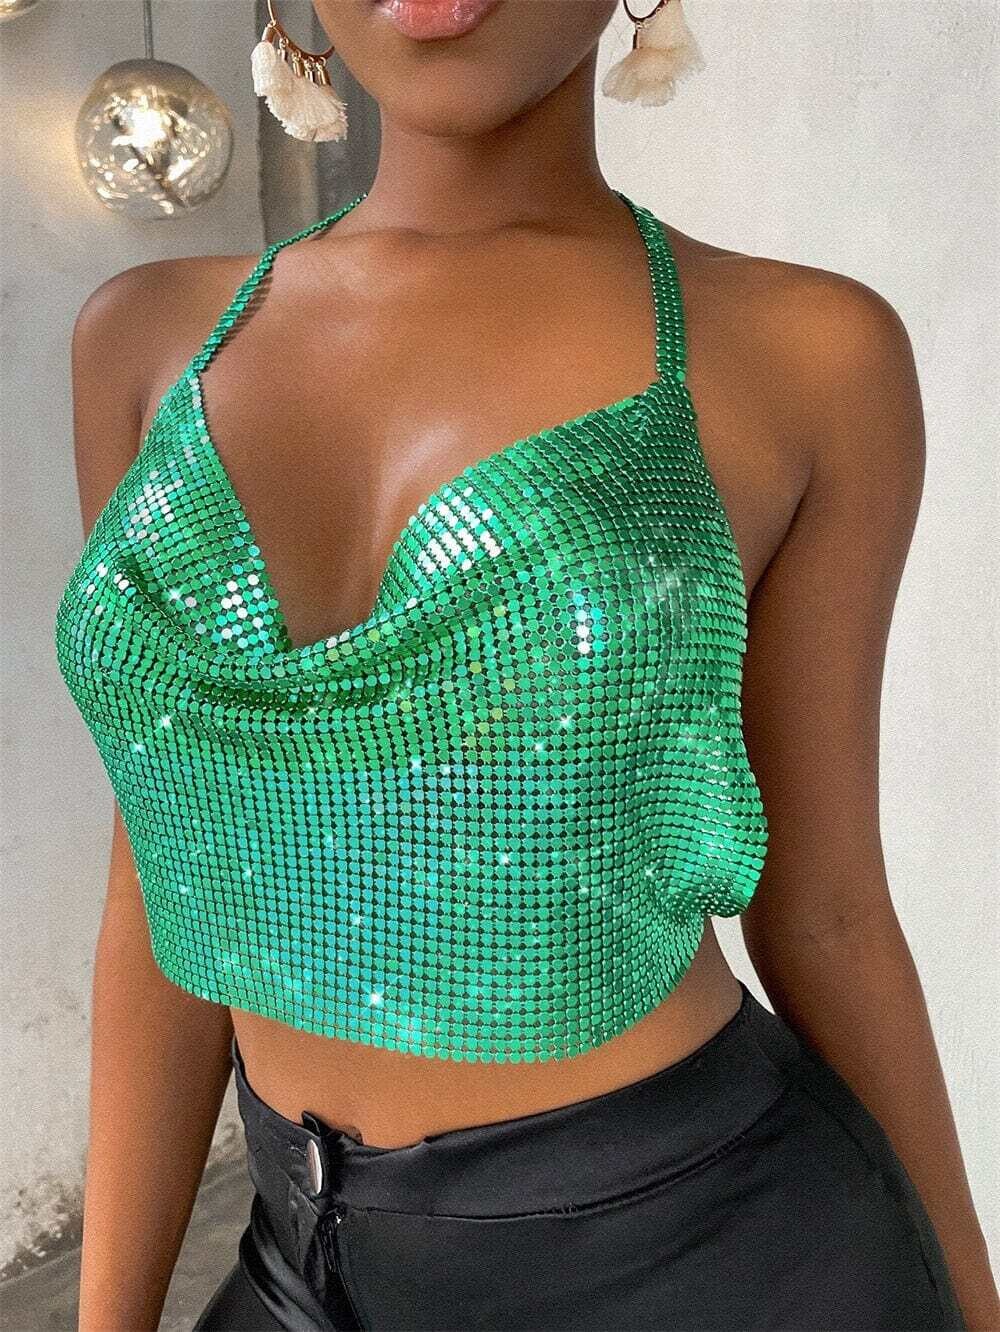 SRUBY Sexy Party Crop Top Sequined Halter Rhinestone Crop Top Women Summer Beach Party Club Top Backless See Through Ladies Tops